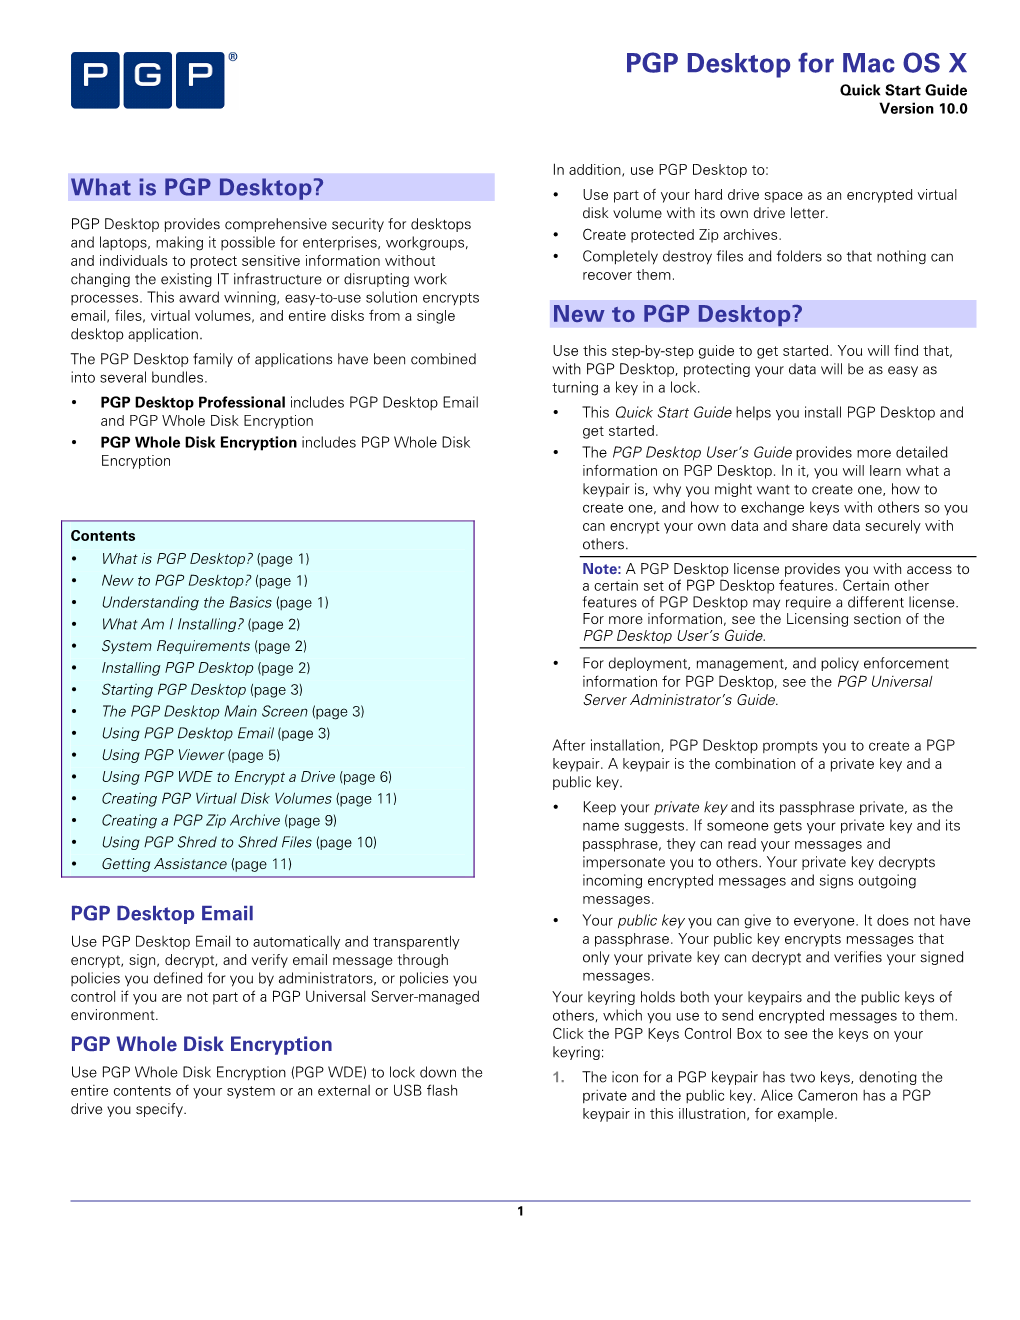 PGP Desktop for Mac OS X Quick Start Guide Version 10.0